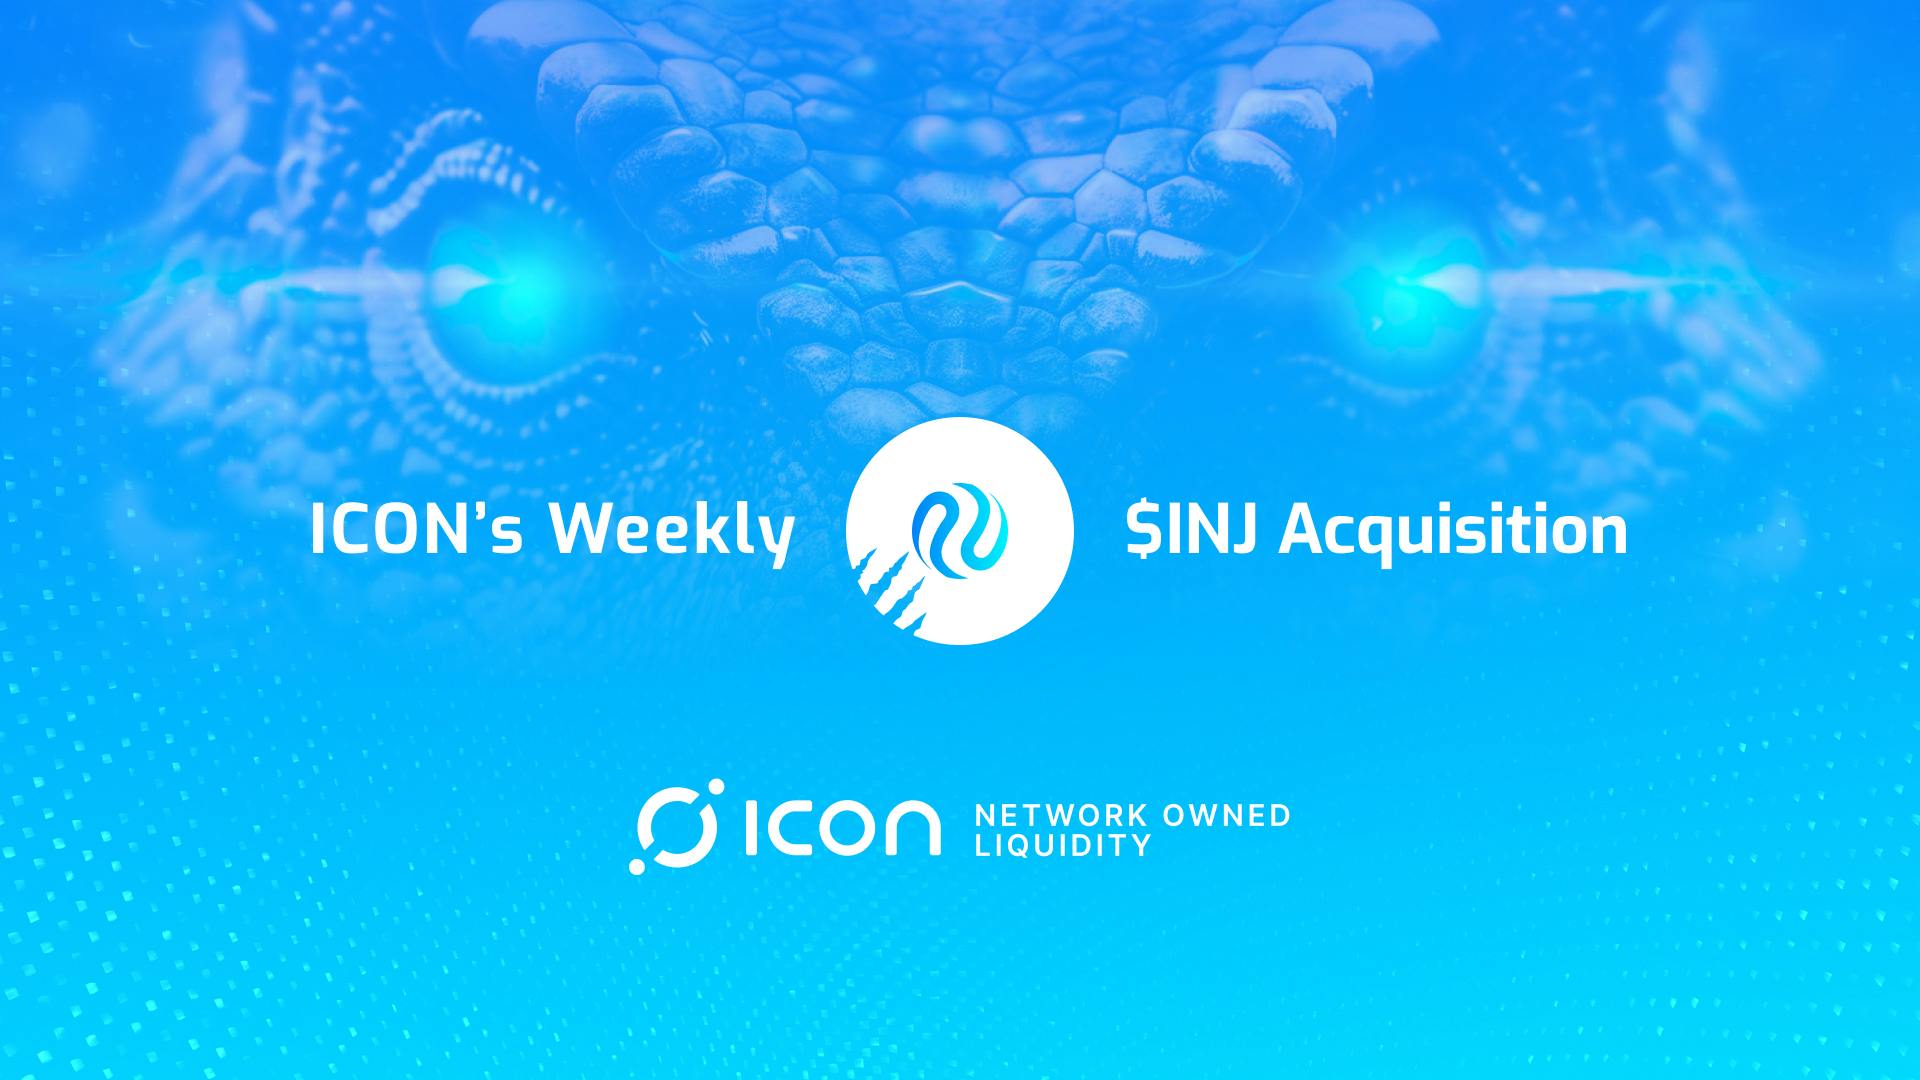 Balanced, ICON's flagship DEX and lending platform, has integrated with Injective and is enhancing cross-chain liquidity through Network Owned Liquidity. Weekly network acquisition of $INJ has begun with the front end trading experience to follow soon.